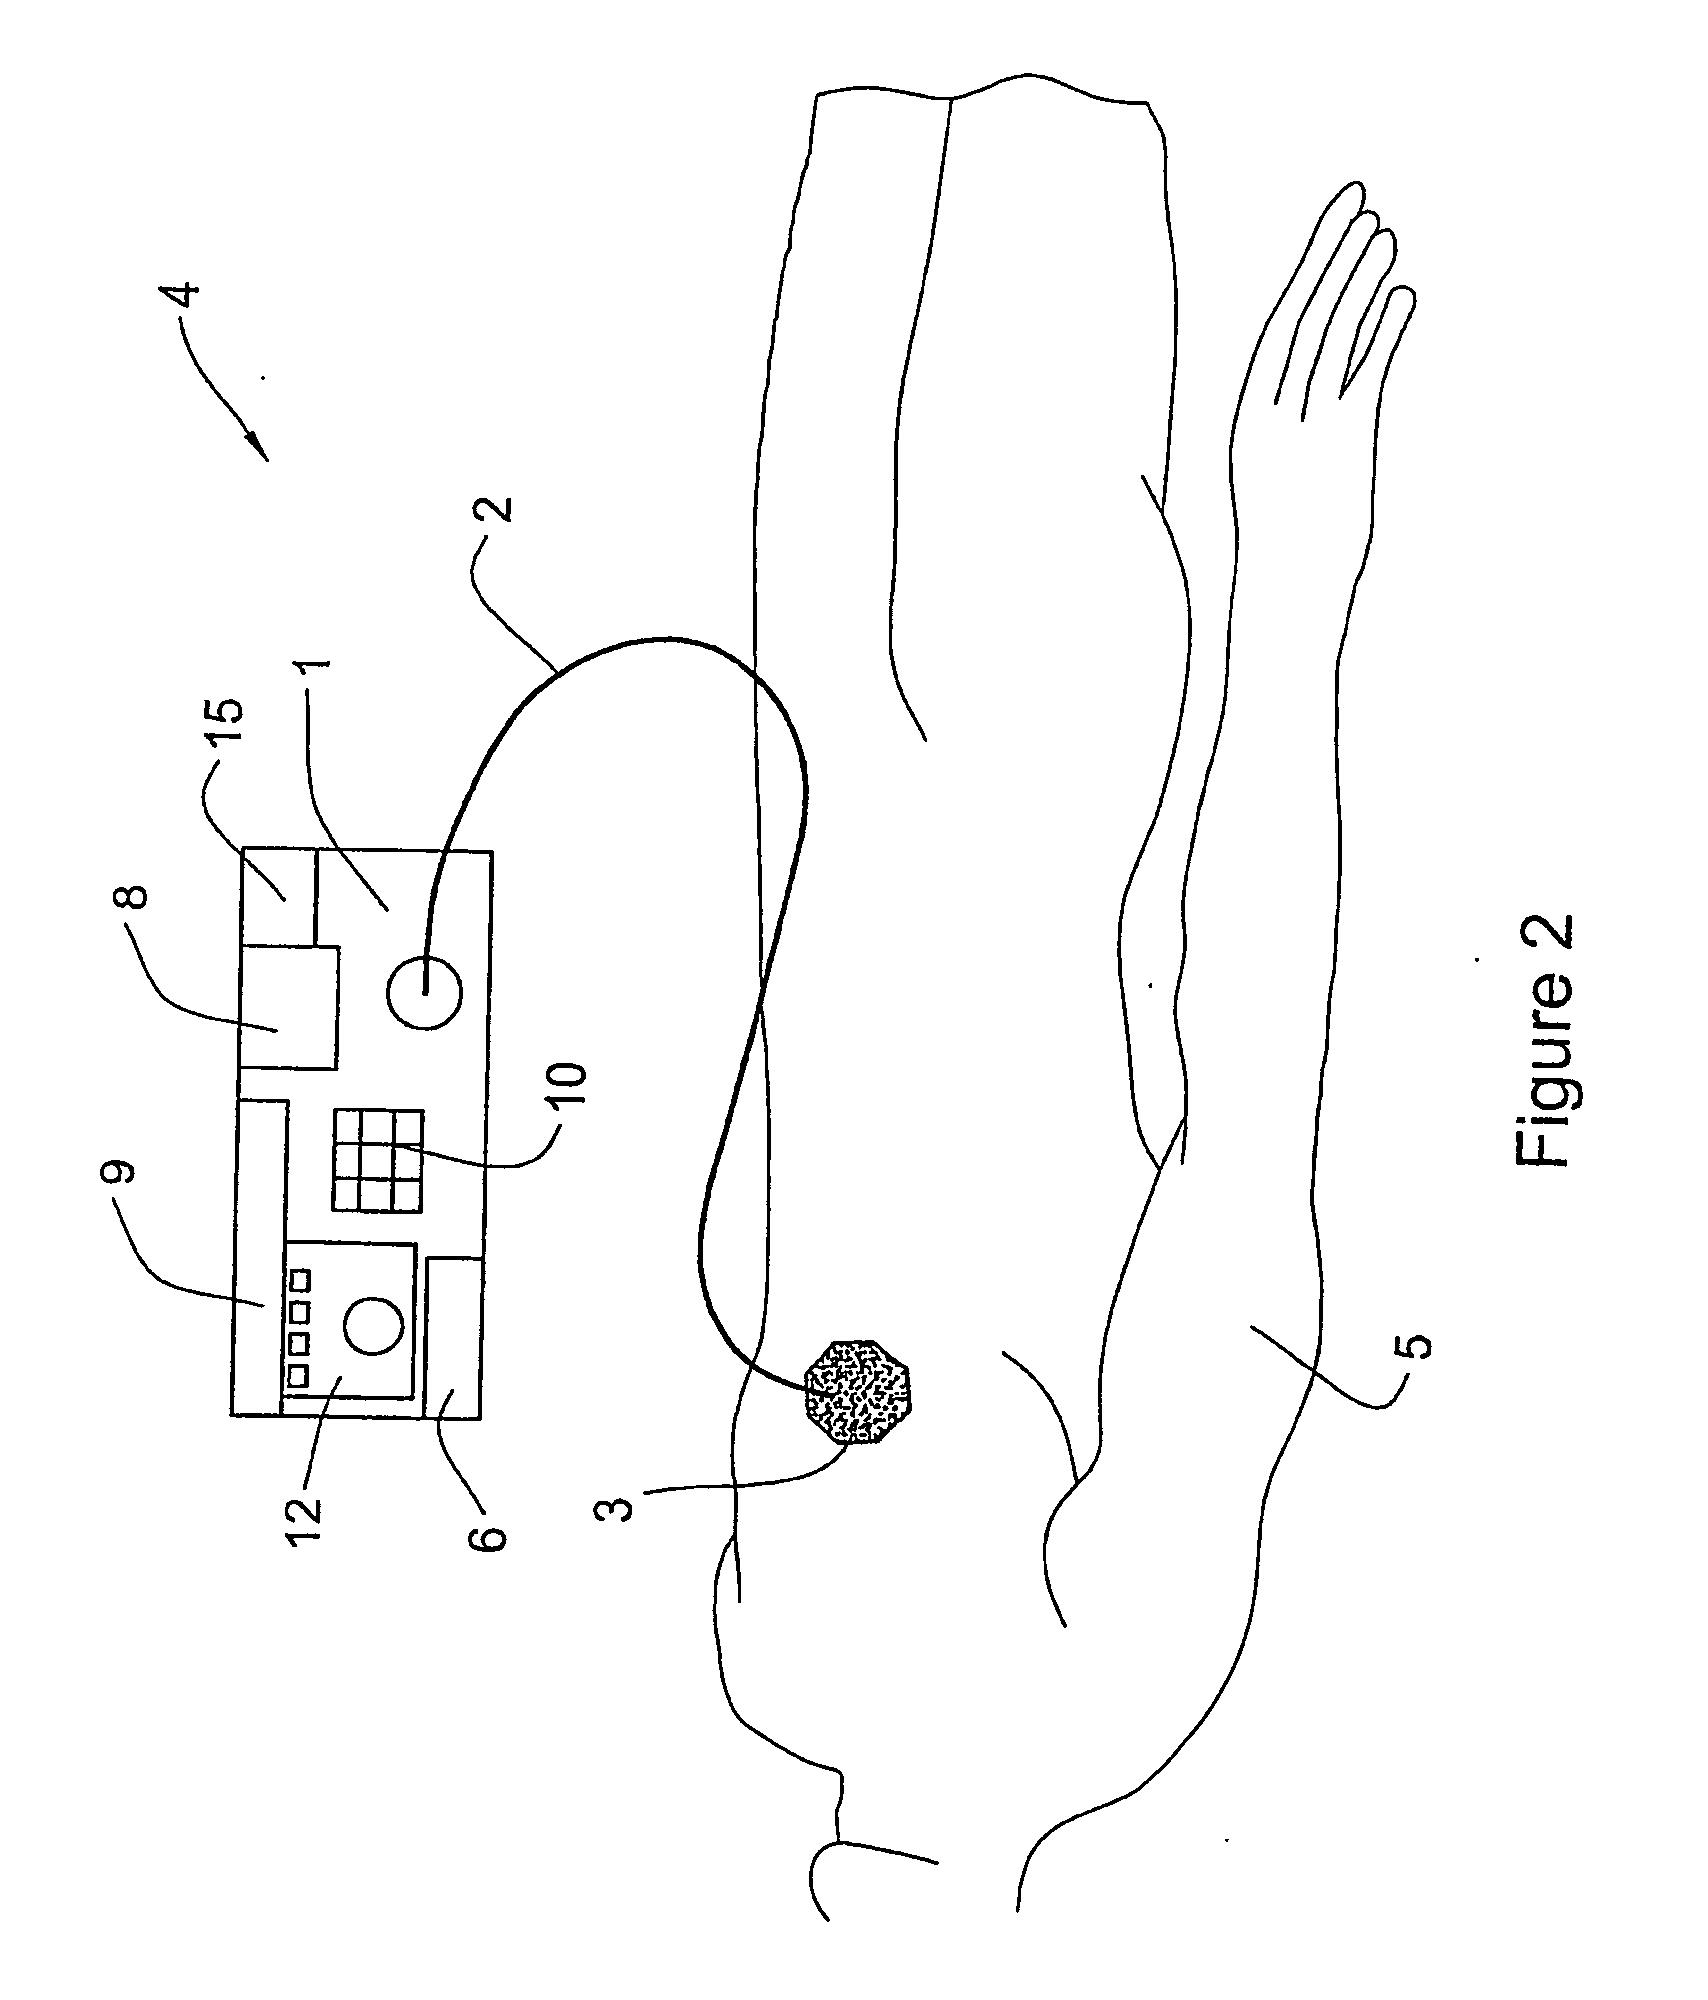 Method and Apparatus for Treatment of Adipose Tissue